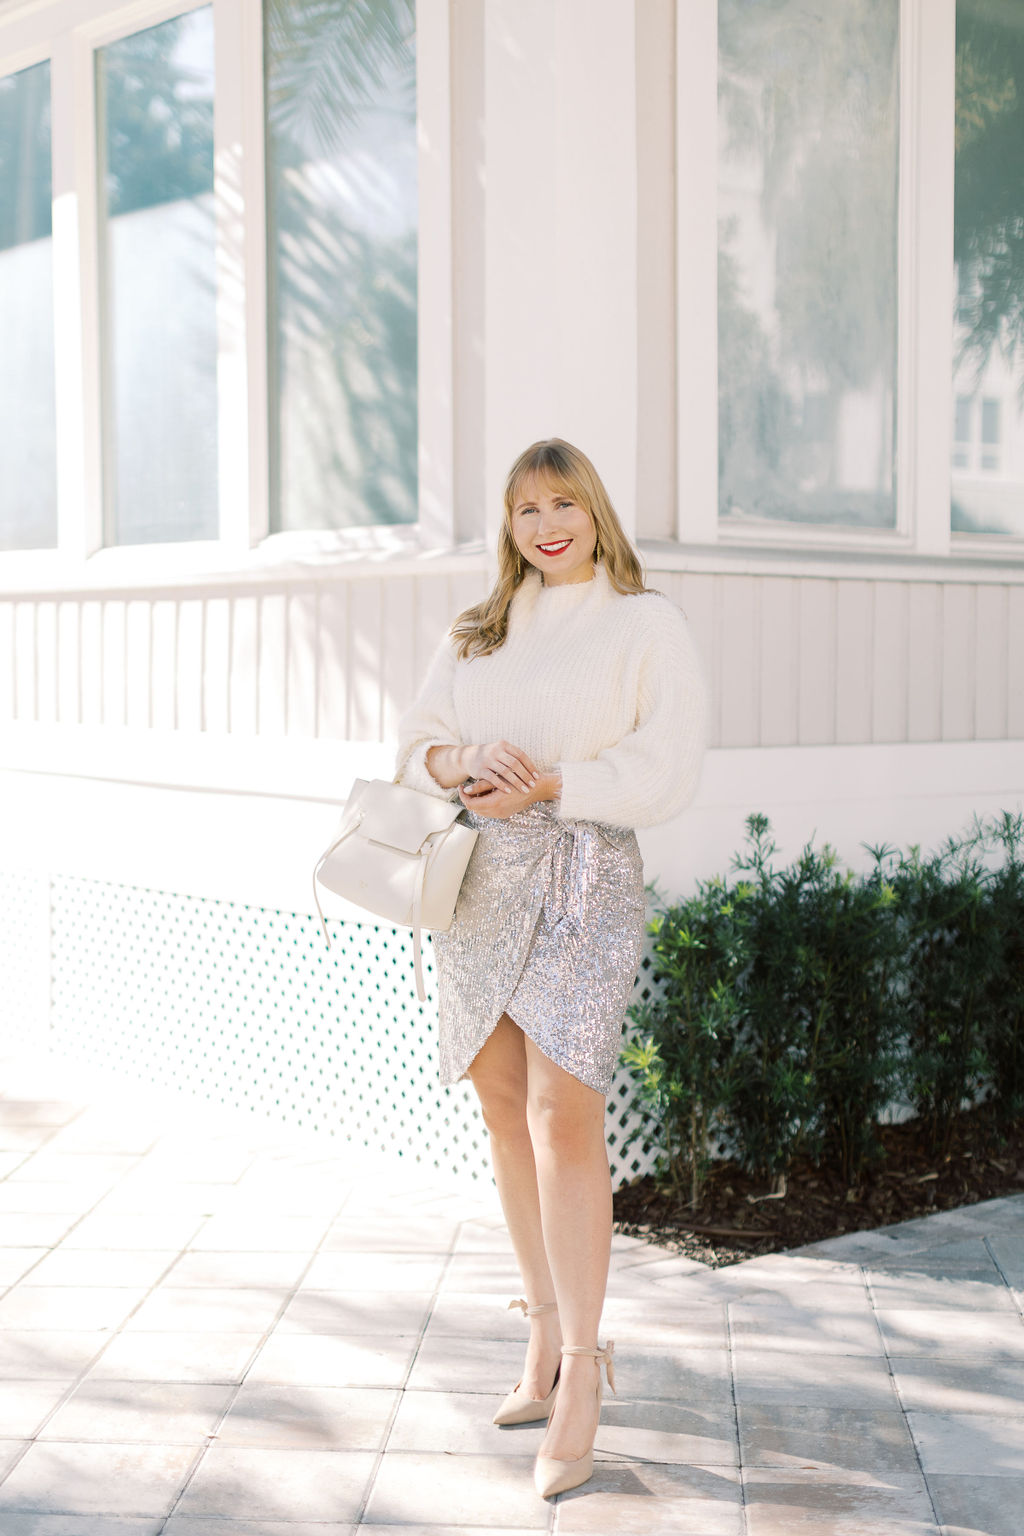 New Years Eve Outfit Ideas 2021. What to Wear for a New Years Eve Party. Affordable by Amanda wears a cozy white sweater with a silver sequin mini skirt and nude heels.